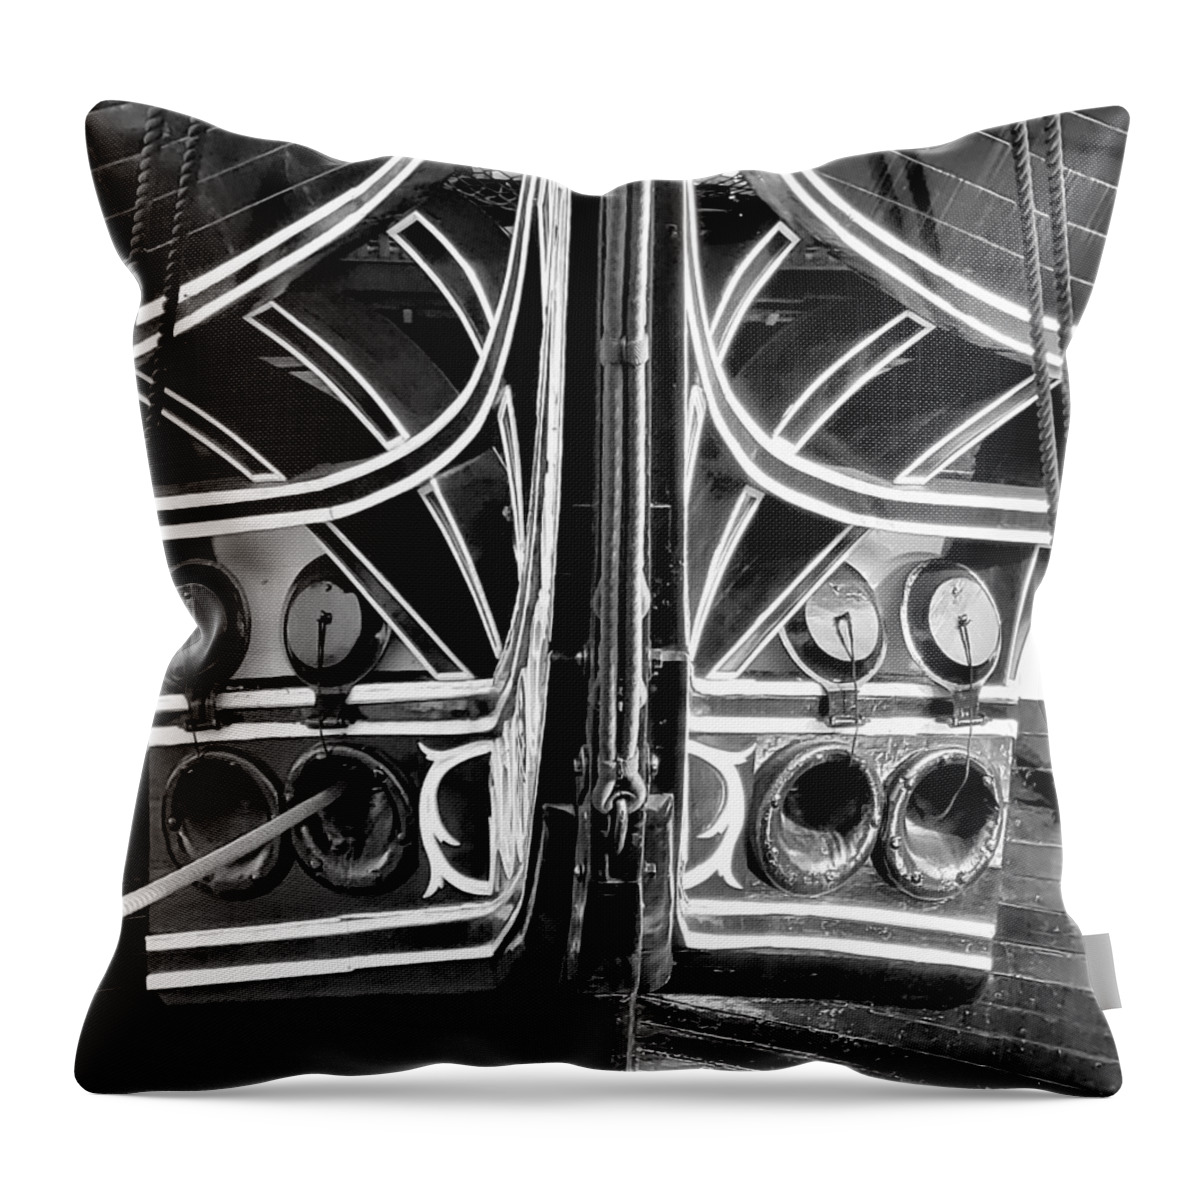 Uss Constitution Throw Pillow featuring the photograph Old Ironsides Forcastle B W by Rob Hans